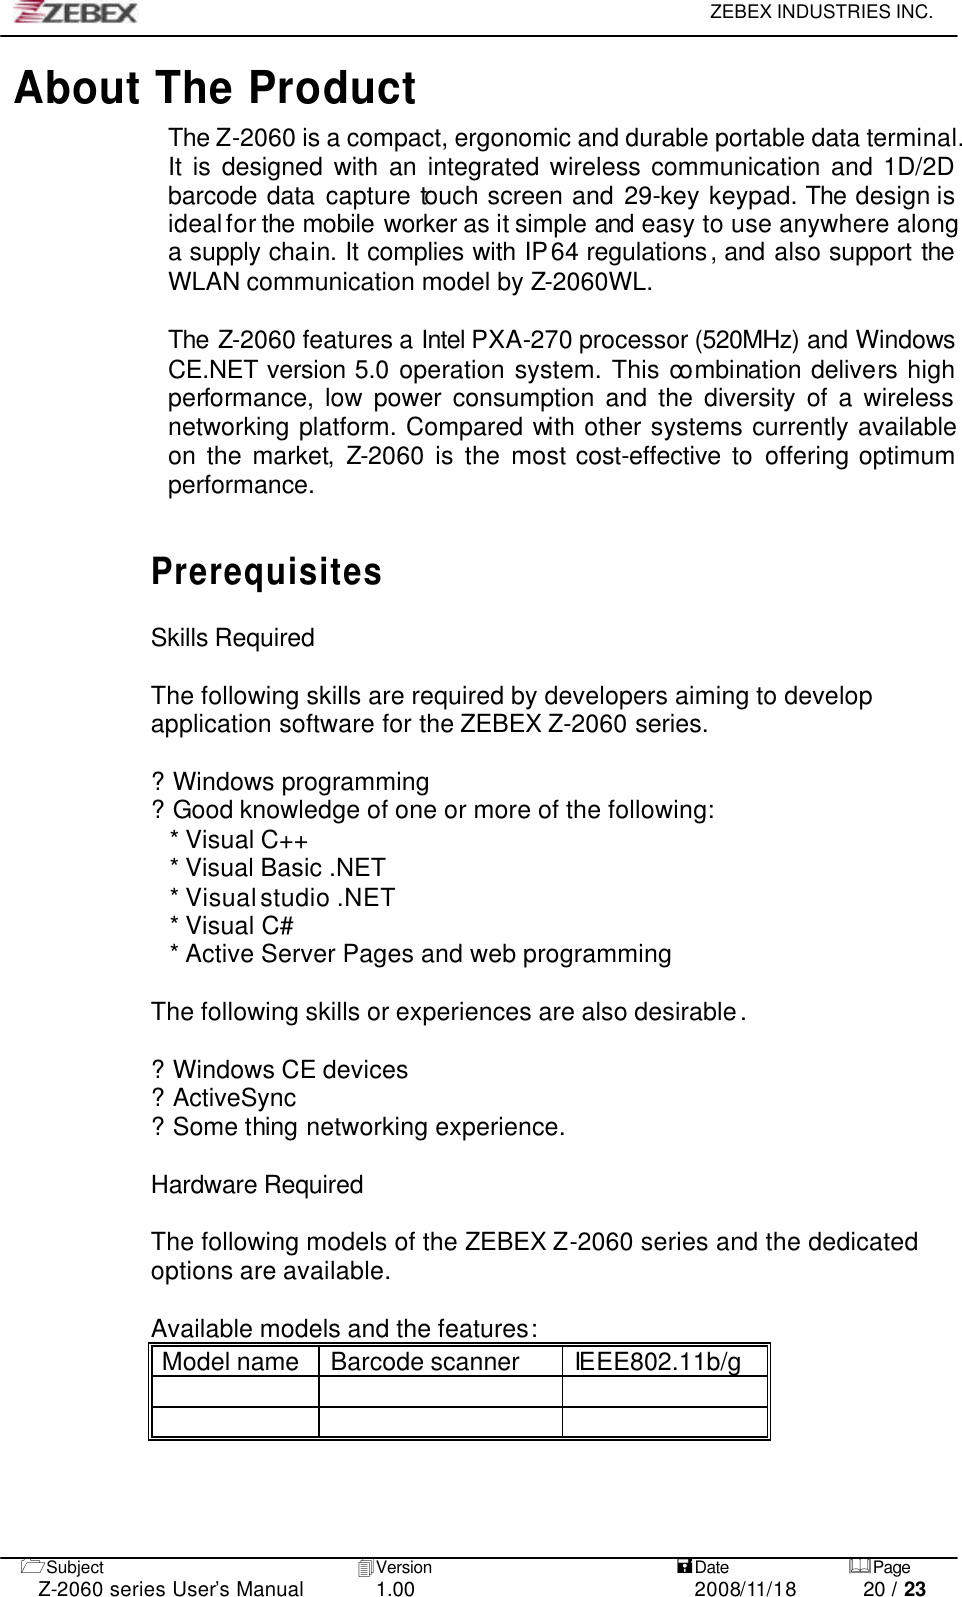     ZEBEX INDUSTRIES INC.   1Subject 4Version   =Date &amp;Page  Z-2060 series User’s Manual 1.00 2008/11/18 20 / 23 About The Product The Z-2060 is a compact, ergonomic and durable portable data terminal. It is designed with an integrated wireless communication and 1D/2D barcode data capture touch screen and 29-key keypad. The design is ideal for the mobile worker as it simple and easy to use anywhere along a supply chain. It complies with IP64 regulations, and also support the WLAN communication model by Z-2060WL.  The Z-2060 features a Intel PXA-270 processor (520MHz) and Windows CE.NET version 5.0 operation system. This combination delivers high performance, low power consumption and the diversity of a wireless networking platform. Compared with other systems currently available on the market,  Z-2060 is the most cost-effective to offering optimum performance.    Prerequisites  Skills Required  The following skills are required by developers aiming to develop application software for the ZEBEX Z-2060 series.  ? Windows programming  ? Good knowledge of one or more of the following:   * Visual C++   * Visual Basic .NET   * Visual studio .NET * Visual C#     * Active Server Pages and web programming     The following skills or experiences are also desirable.  ? Windows CE devices   ? ActiveSync   ? Some thing networking experience.  Hardware Required  The following models of the ZEBEX Z-2060 series and the dedicated options are available.  Available models and the features: Model name Barcode scanner IEEE802.11b/g            